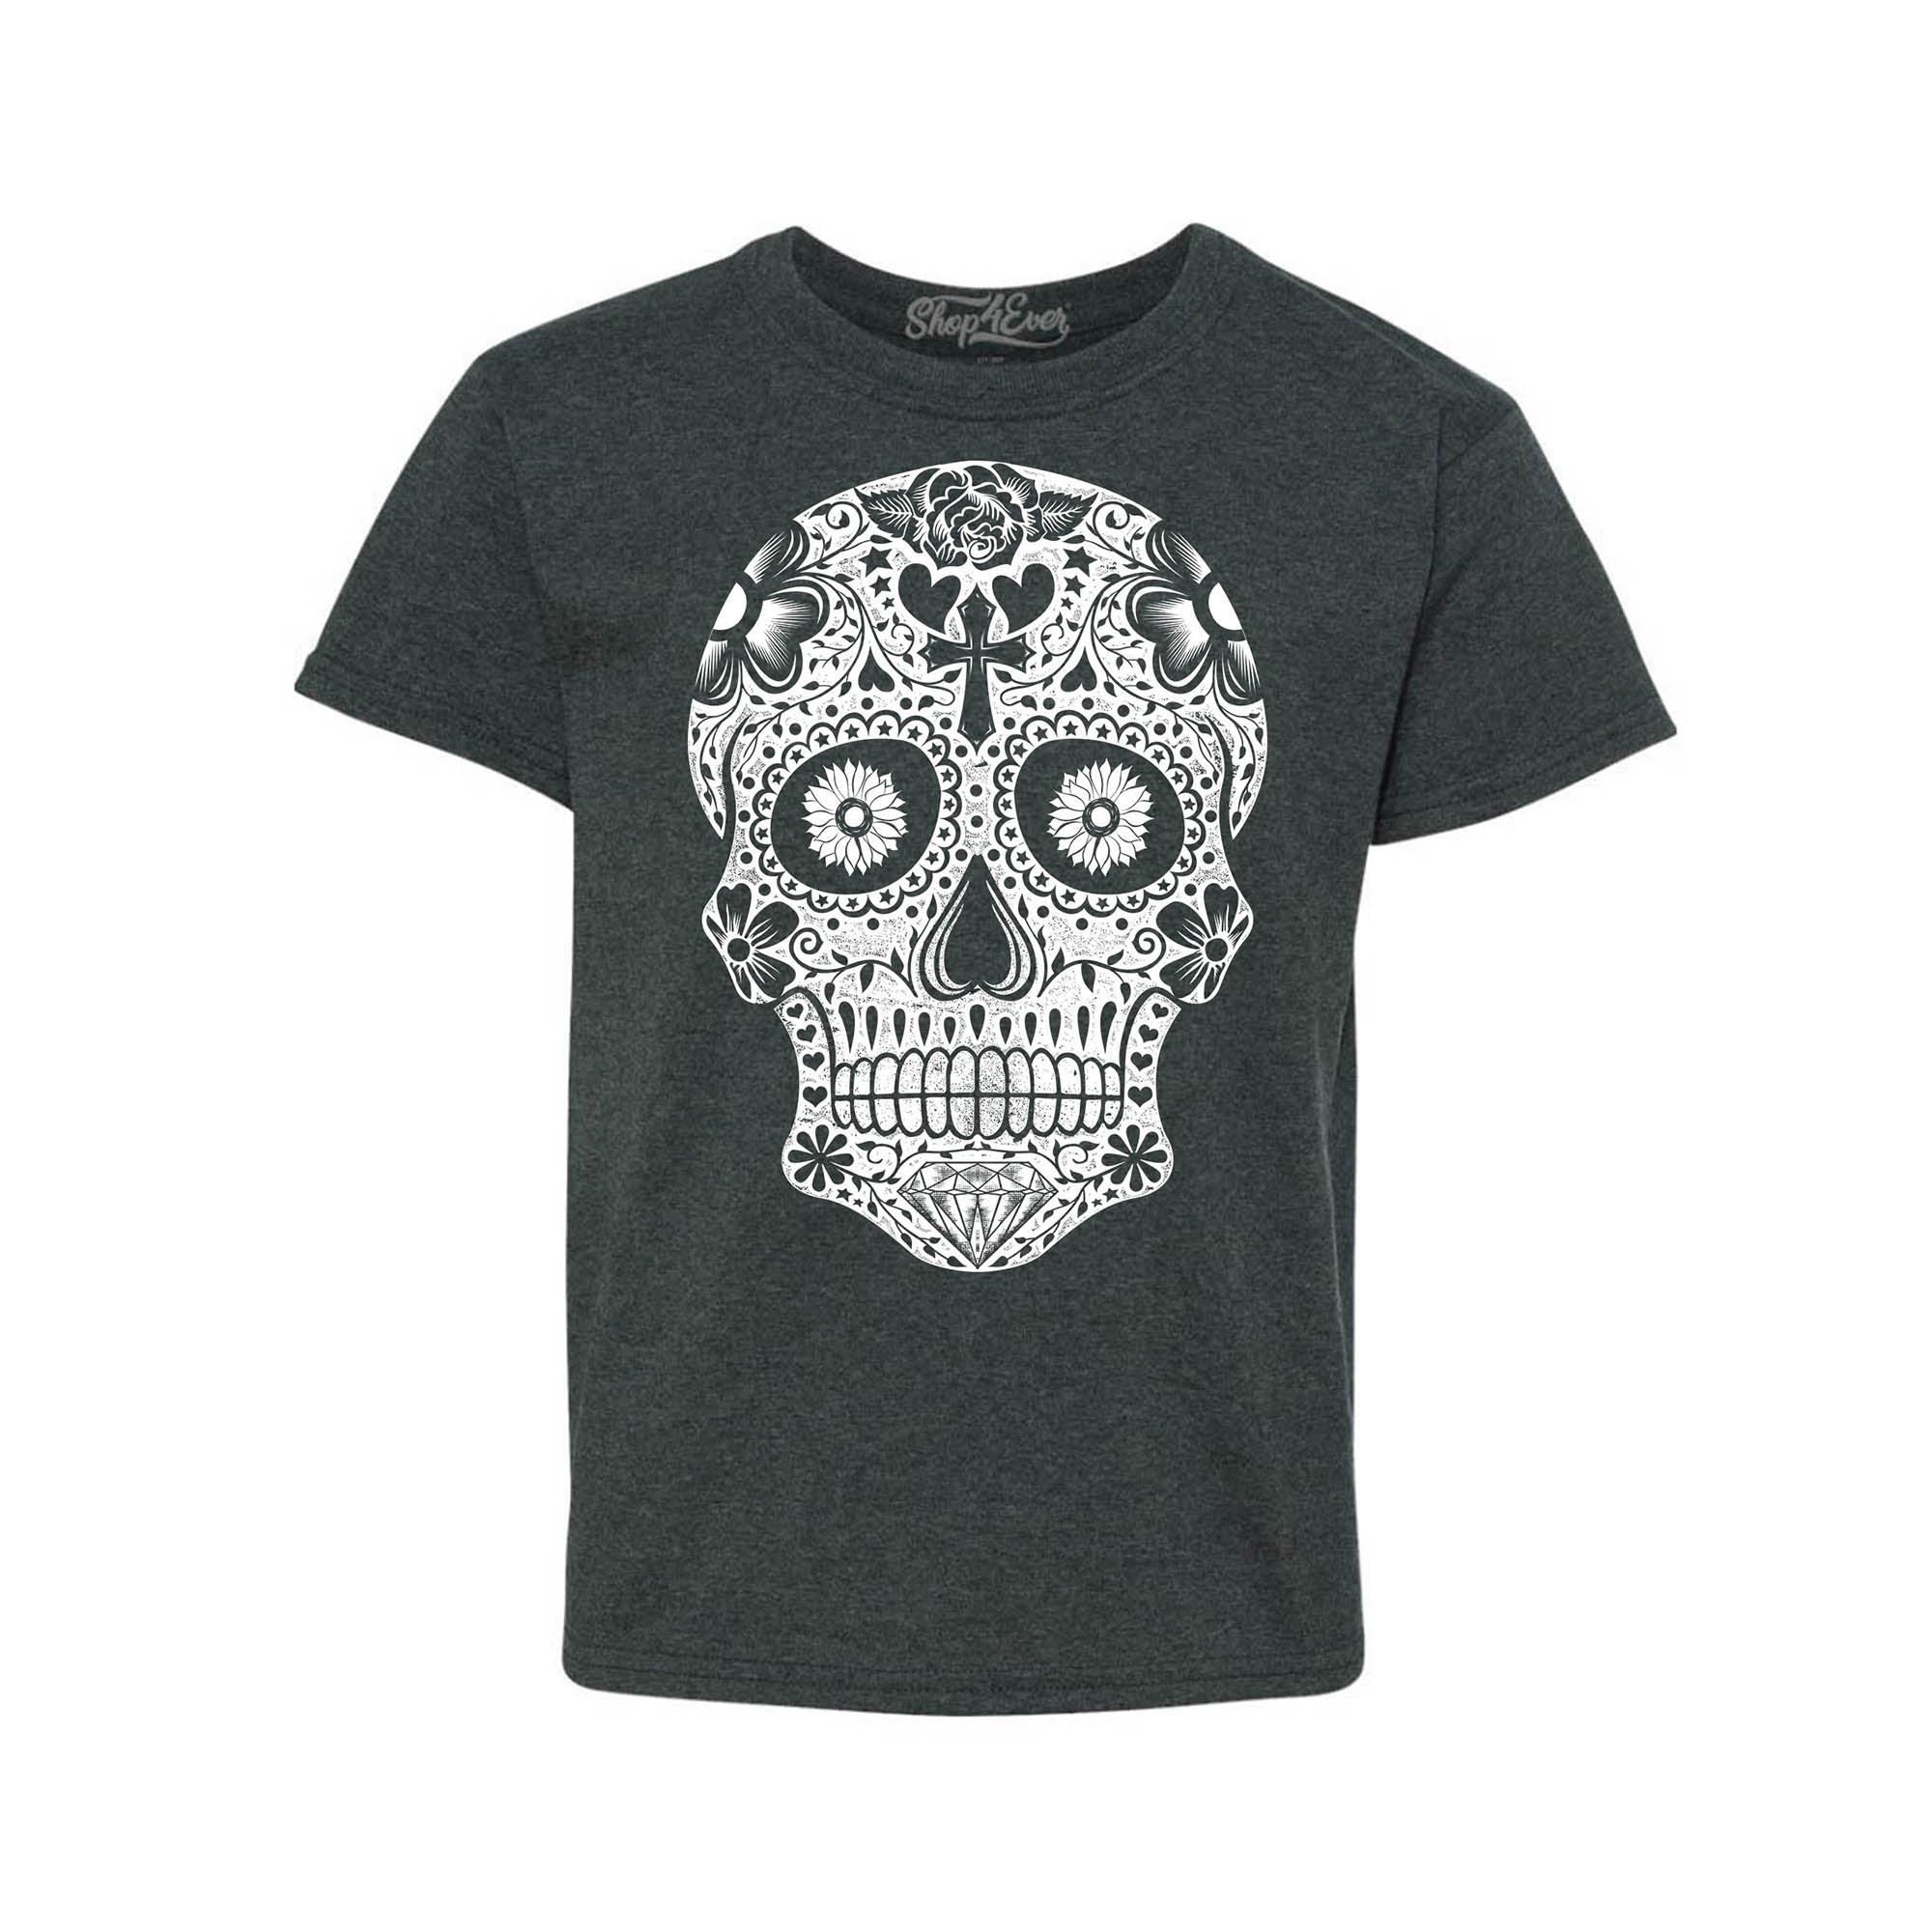 Day of The Dead Child's Tee White Skull Youth's T-Shirt